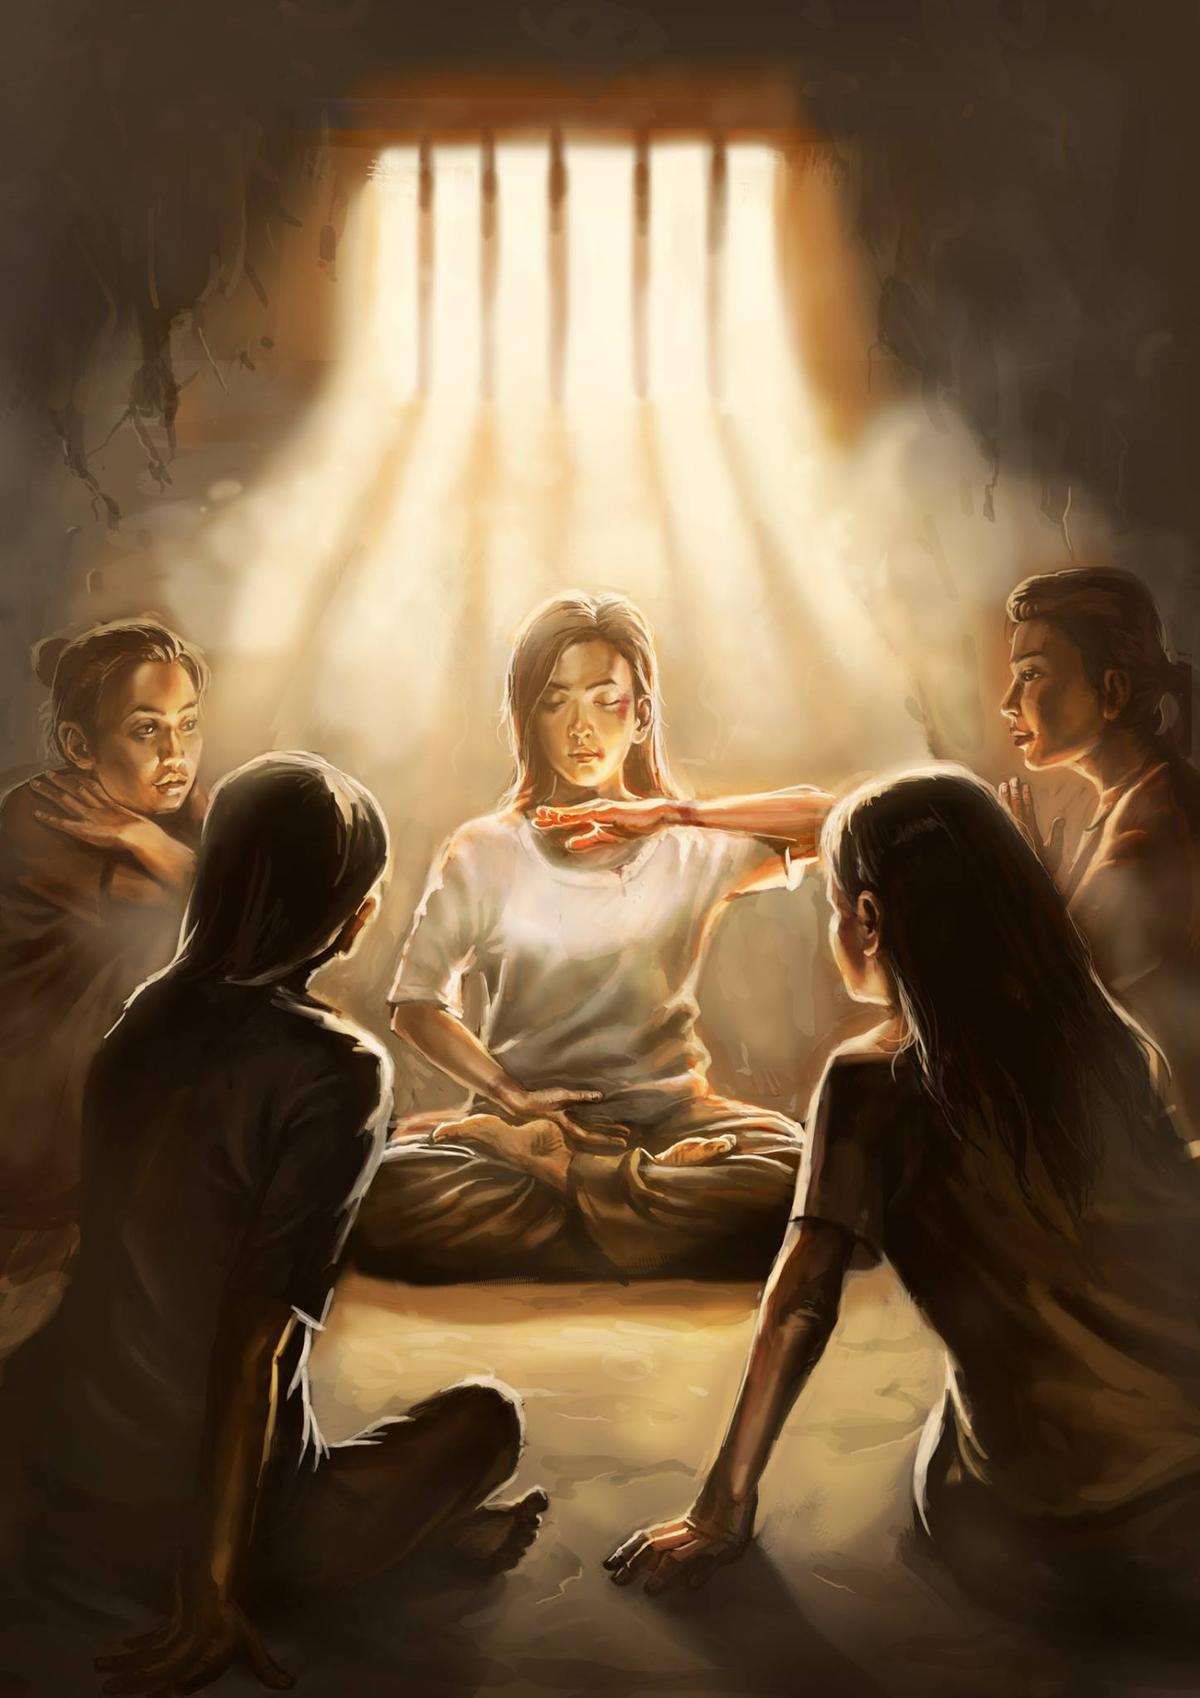 A painting shows criminal inmates looking in awe at a brutally beaten Falun Gong adherent as she meditates while incarcerated in a Chinese prison for refusing to give up her faith. (Courtesy of Minghui.org)